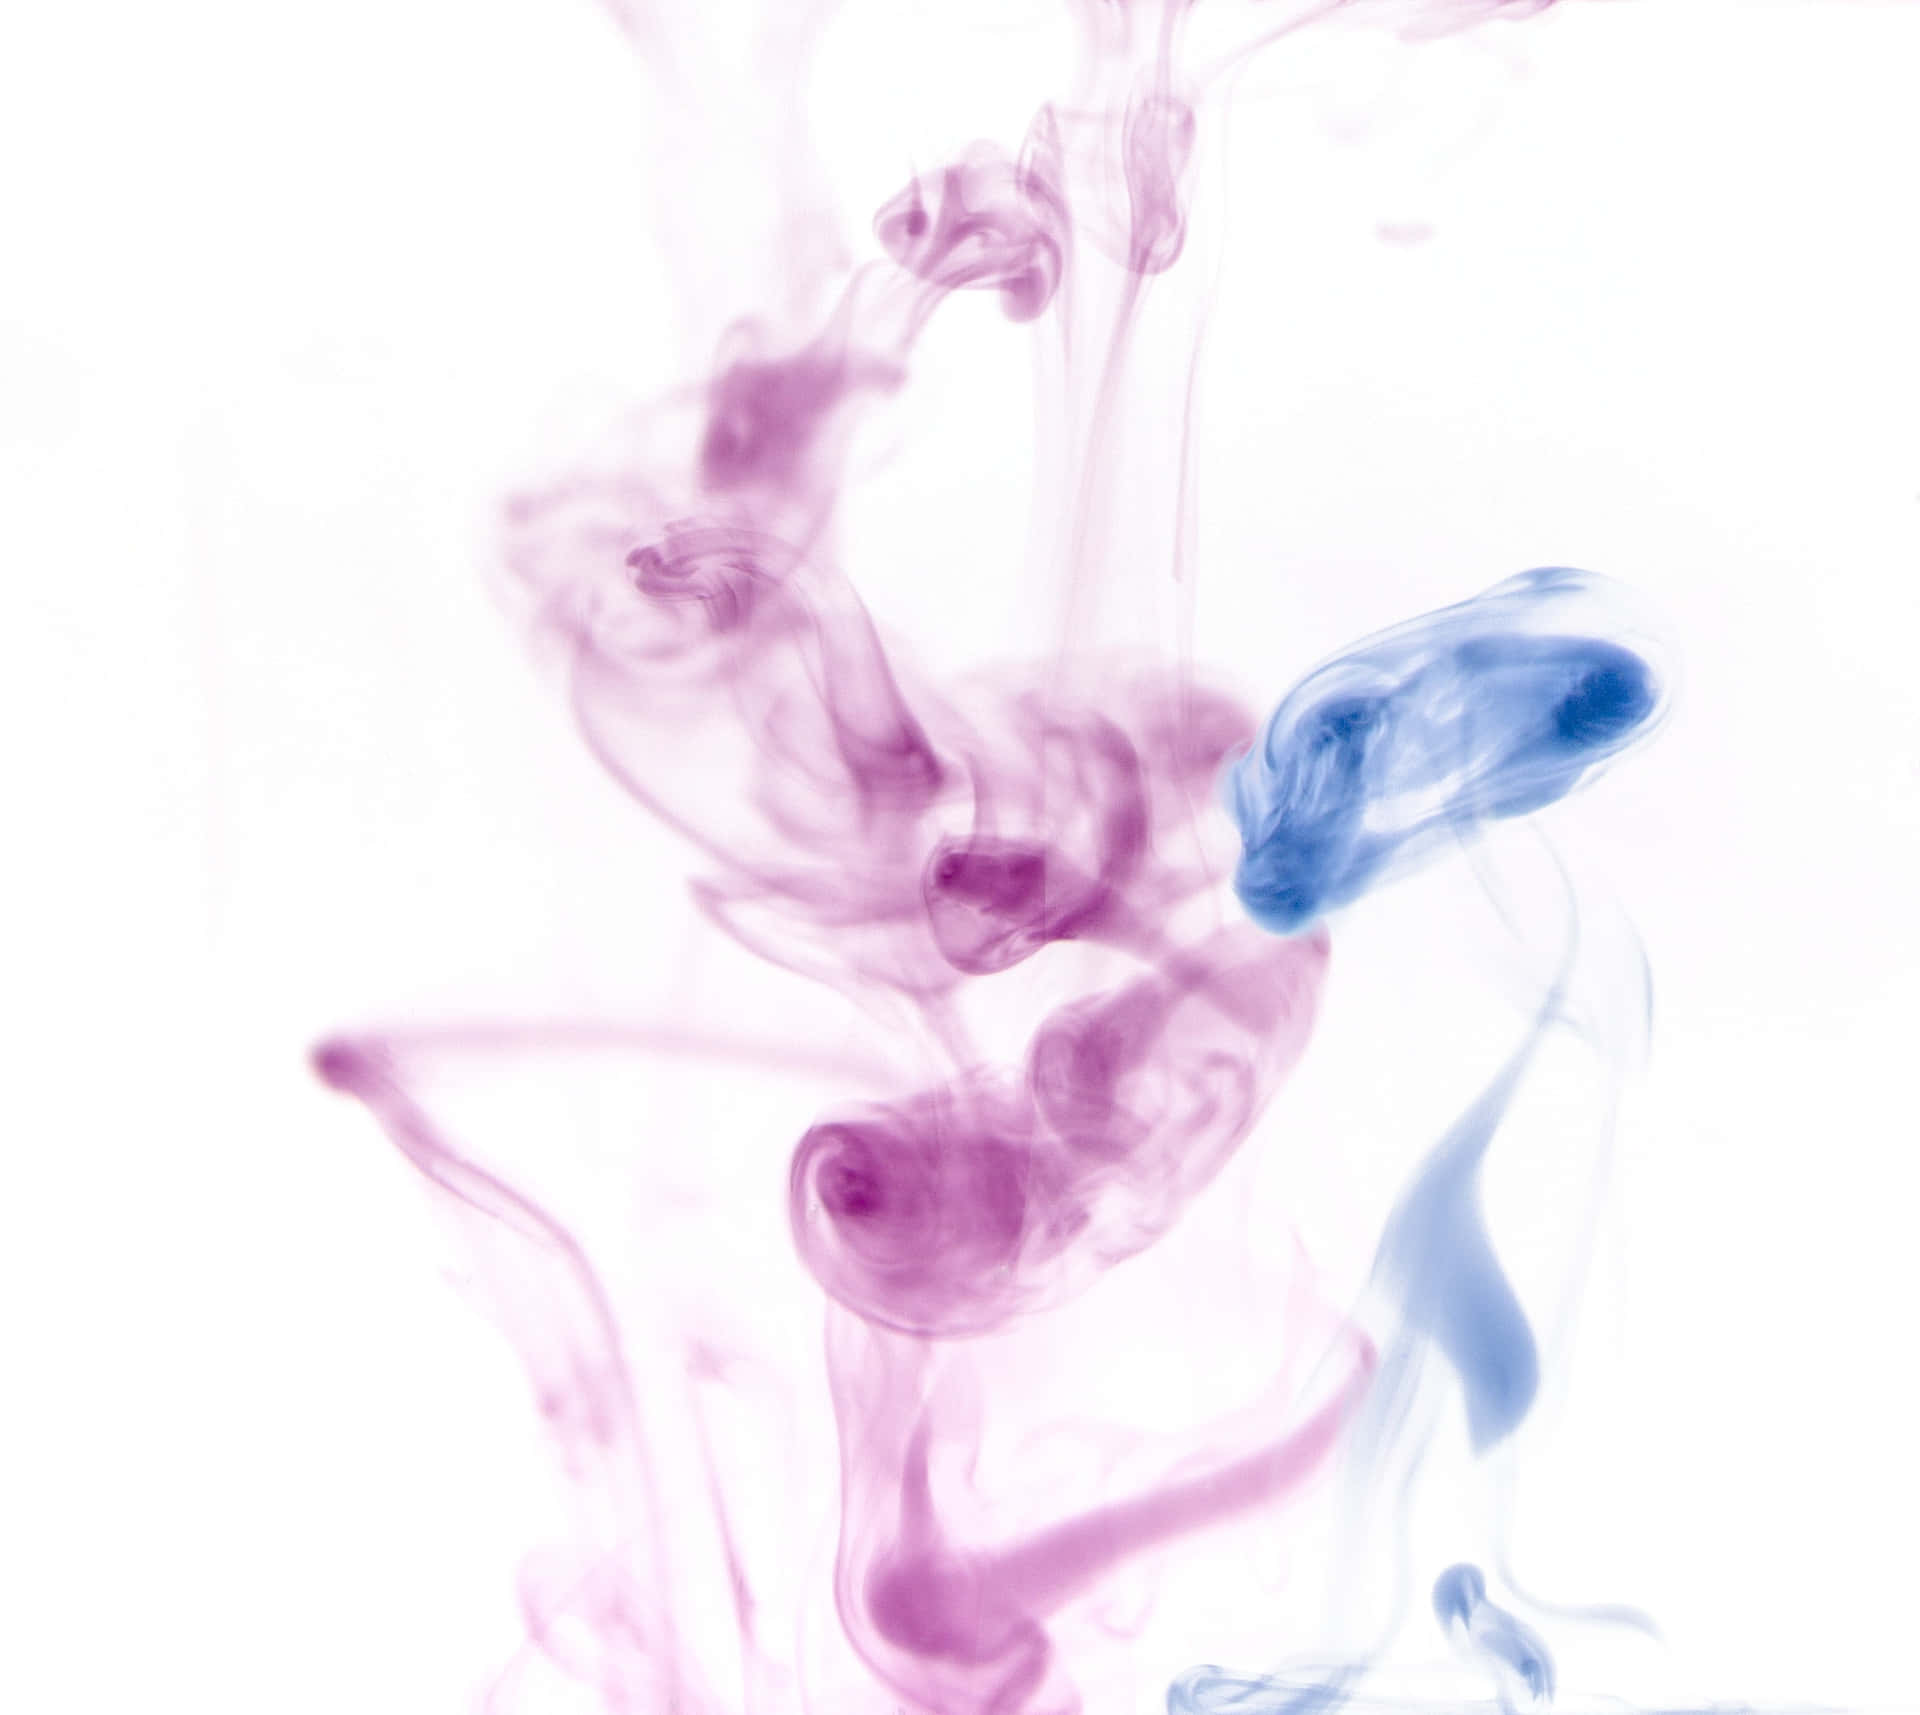 Vibrant Purple Smoke - A Colorful And Mysterious Photographic Subject